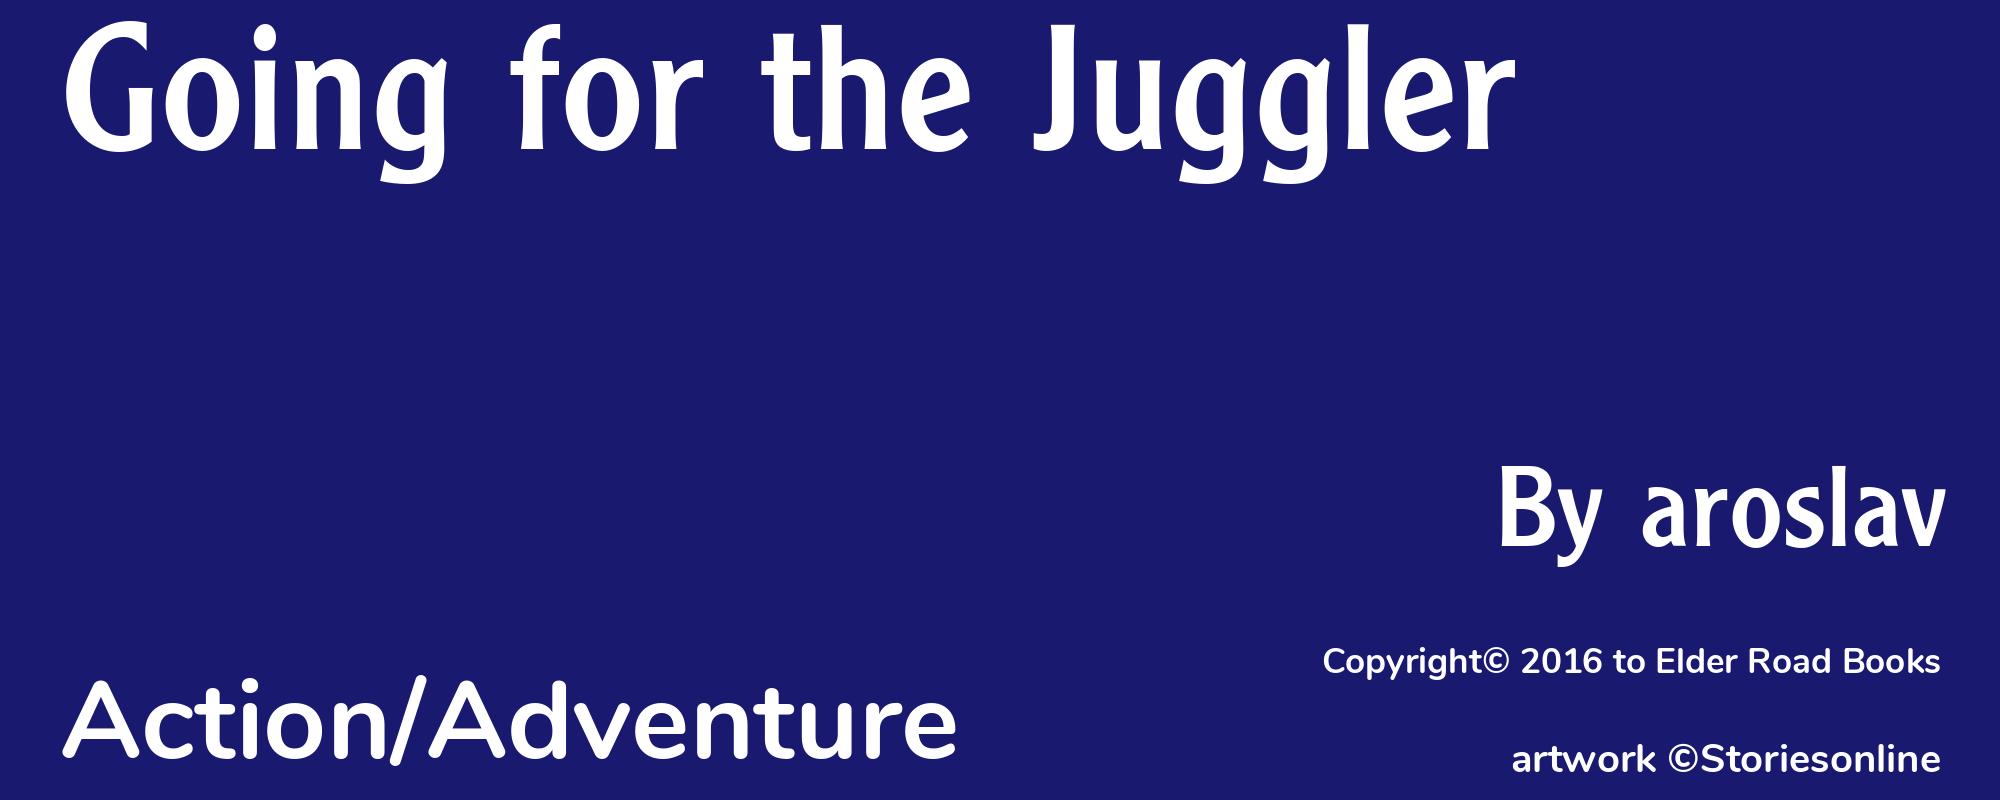 Going for the Juggler - Cover